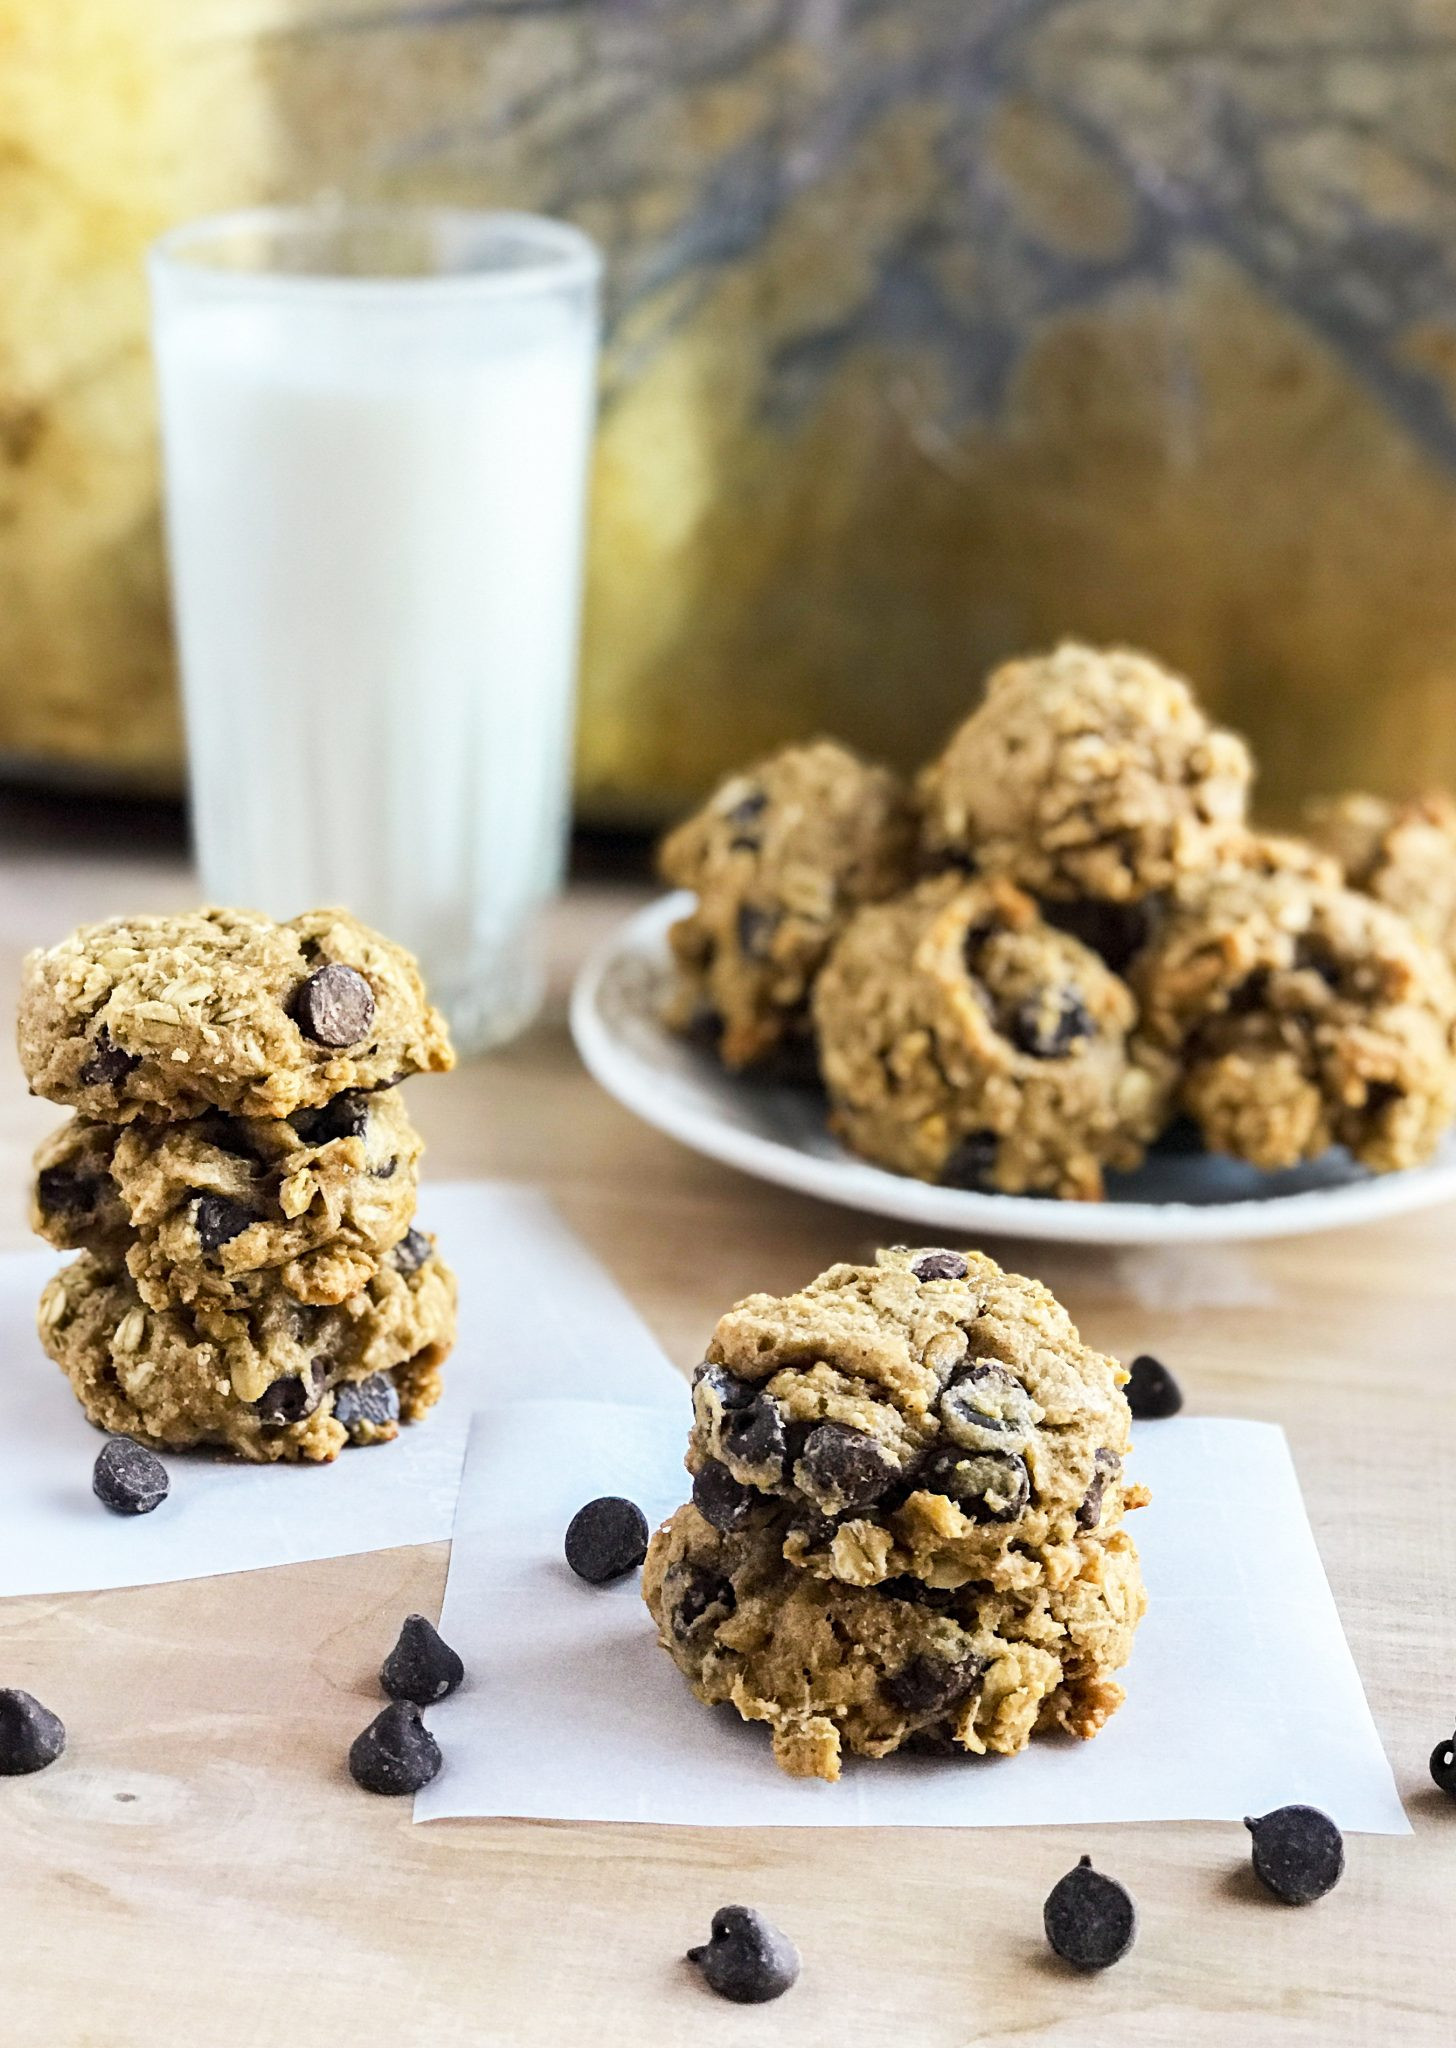 Healthy Peanut Butter Chocolate Chip Cookies
 Healthy Peanut Butter Chocolate Chip Cookies 31 Daily